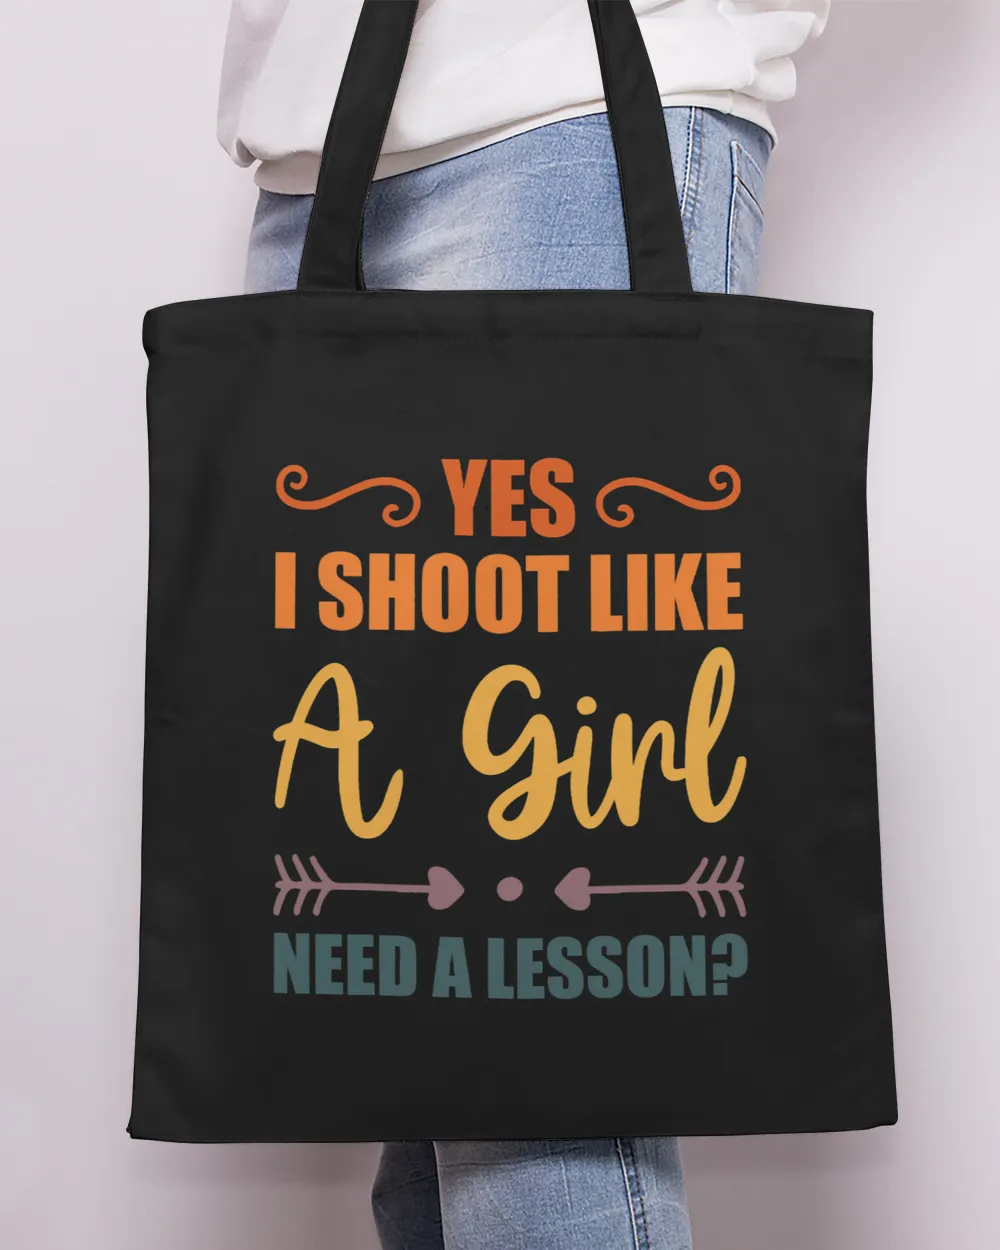 Archery Bow Yes I Shoot Like a Girl Funny Archery Quote